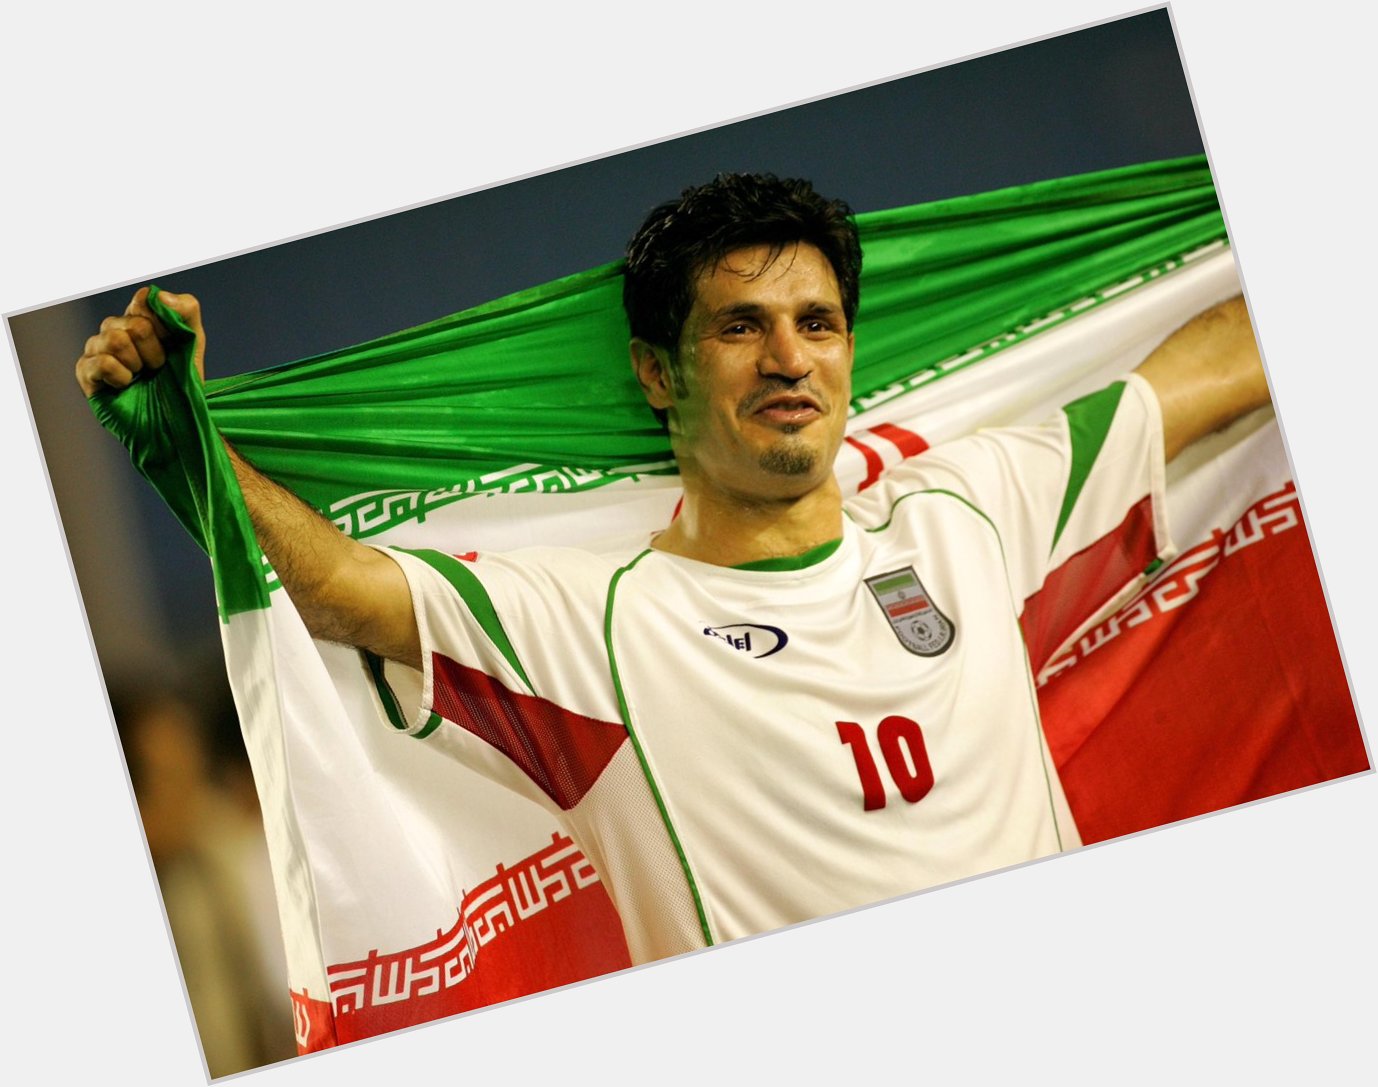 Happy 46th birthday to Ali Daei. No player in history has scored more international goals than him (109). 